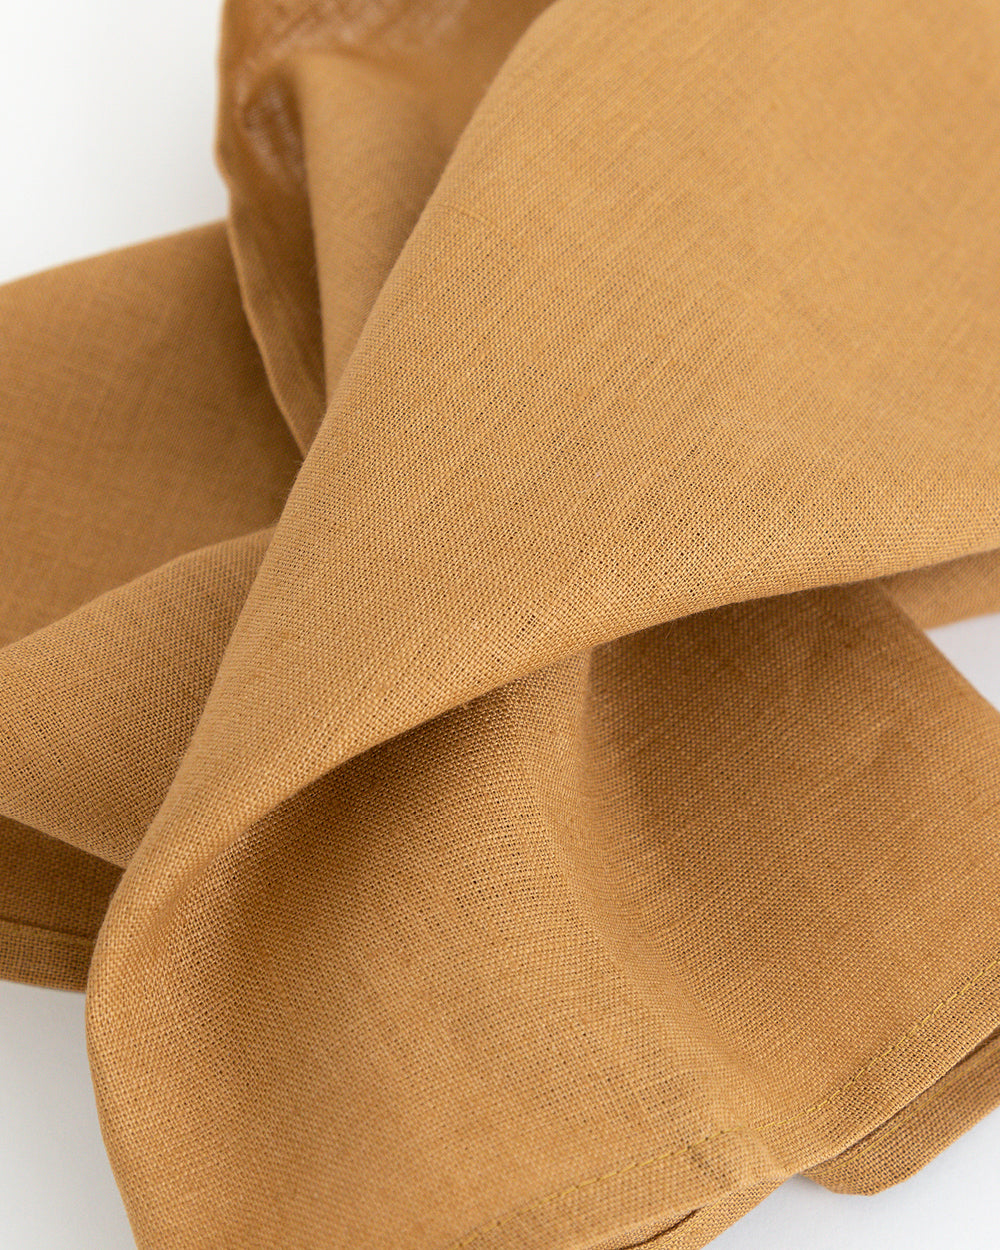 Close up detail of linen tea towel in brown earth-tone